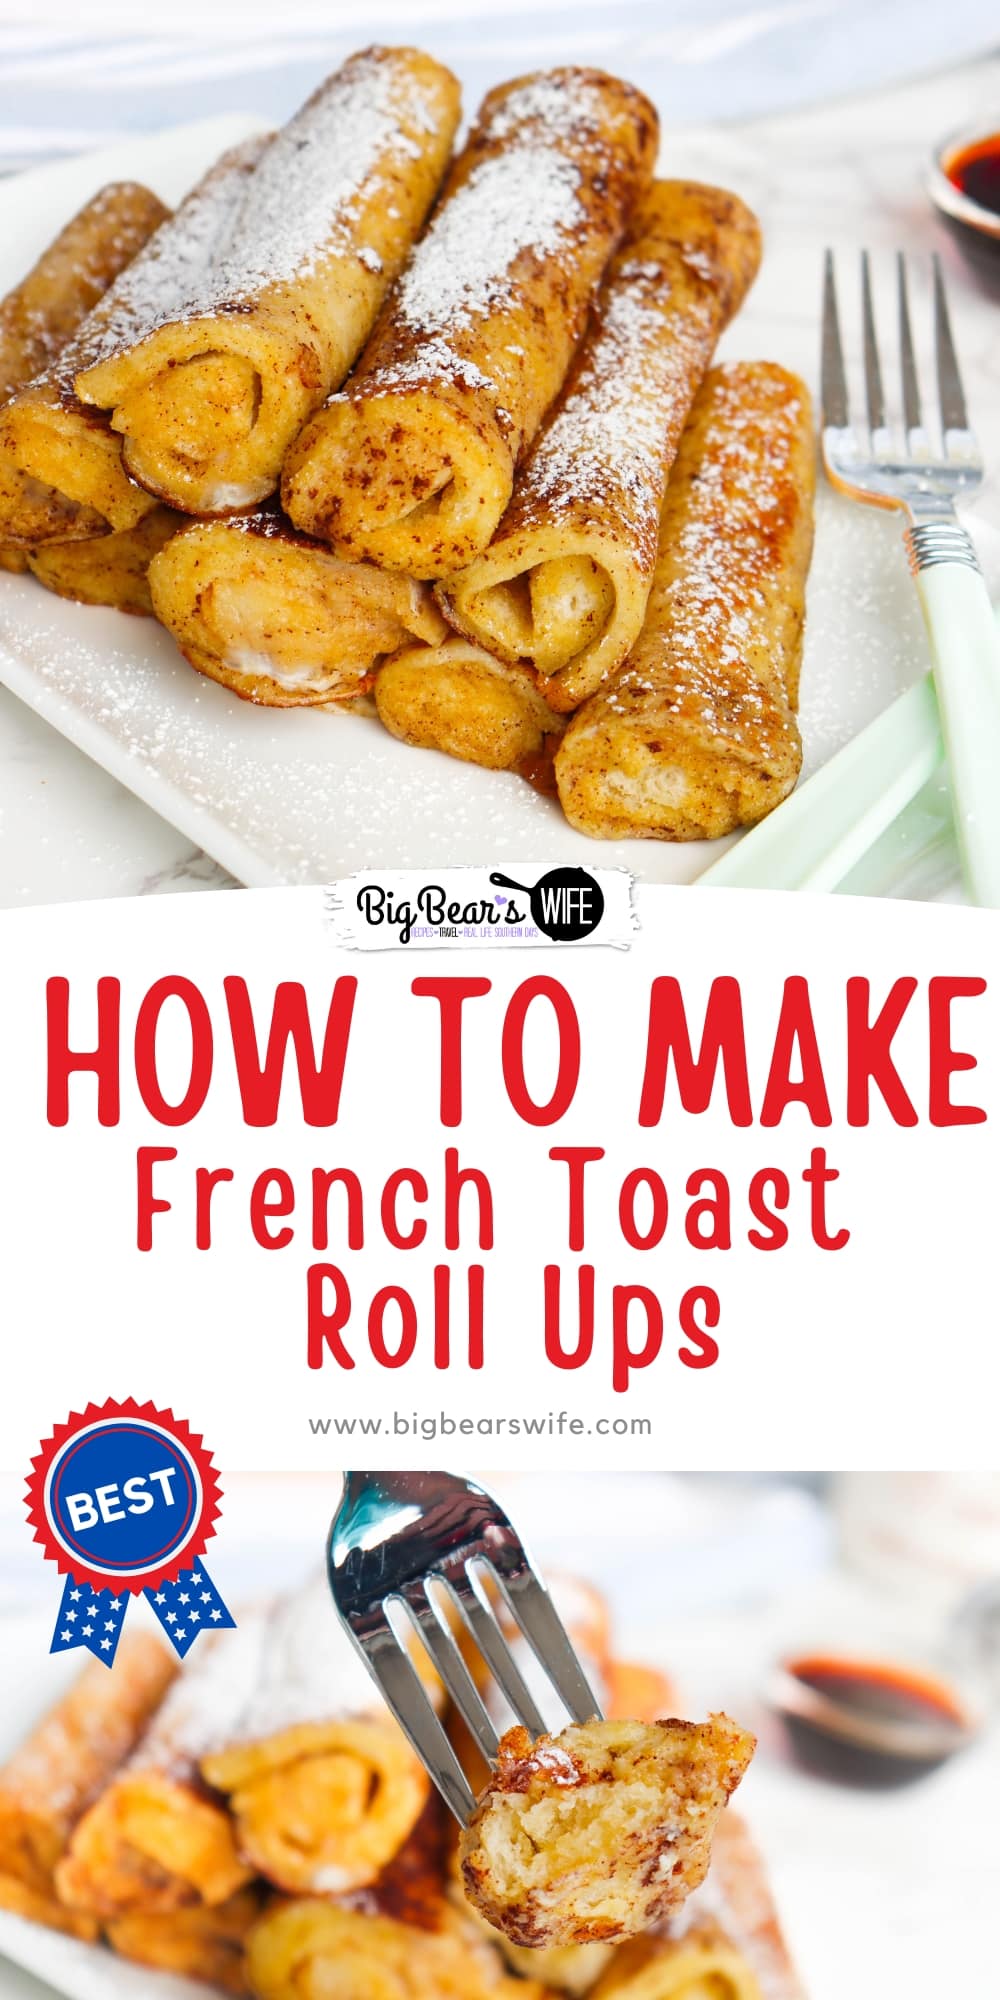 Are your kids tired of the same old breakfast? French toast roll-ups are a fun and delicious way to switch things up! We'll show you how to make French toast roll-ups that your kids will love. Get ready to make breakfast their favorite meal of the day! via @bigbearswife